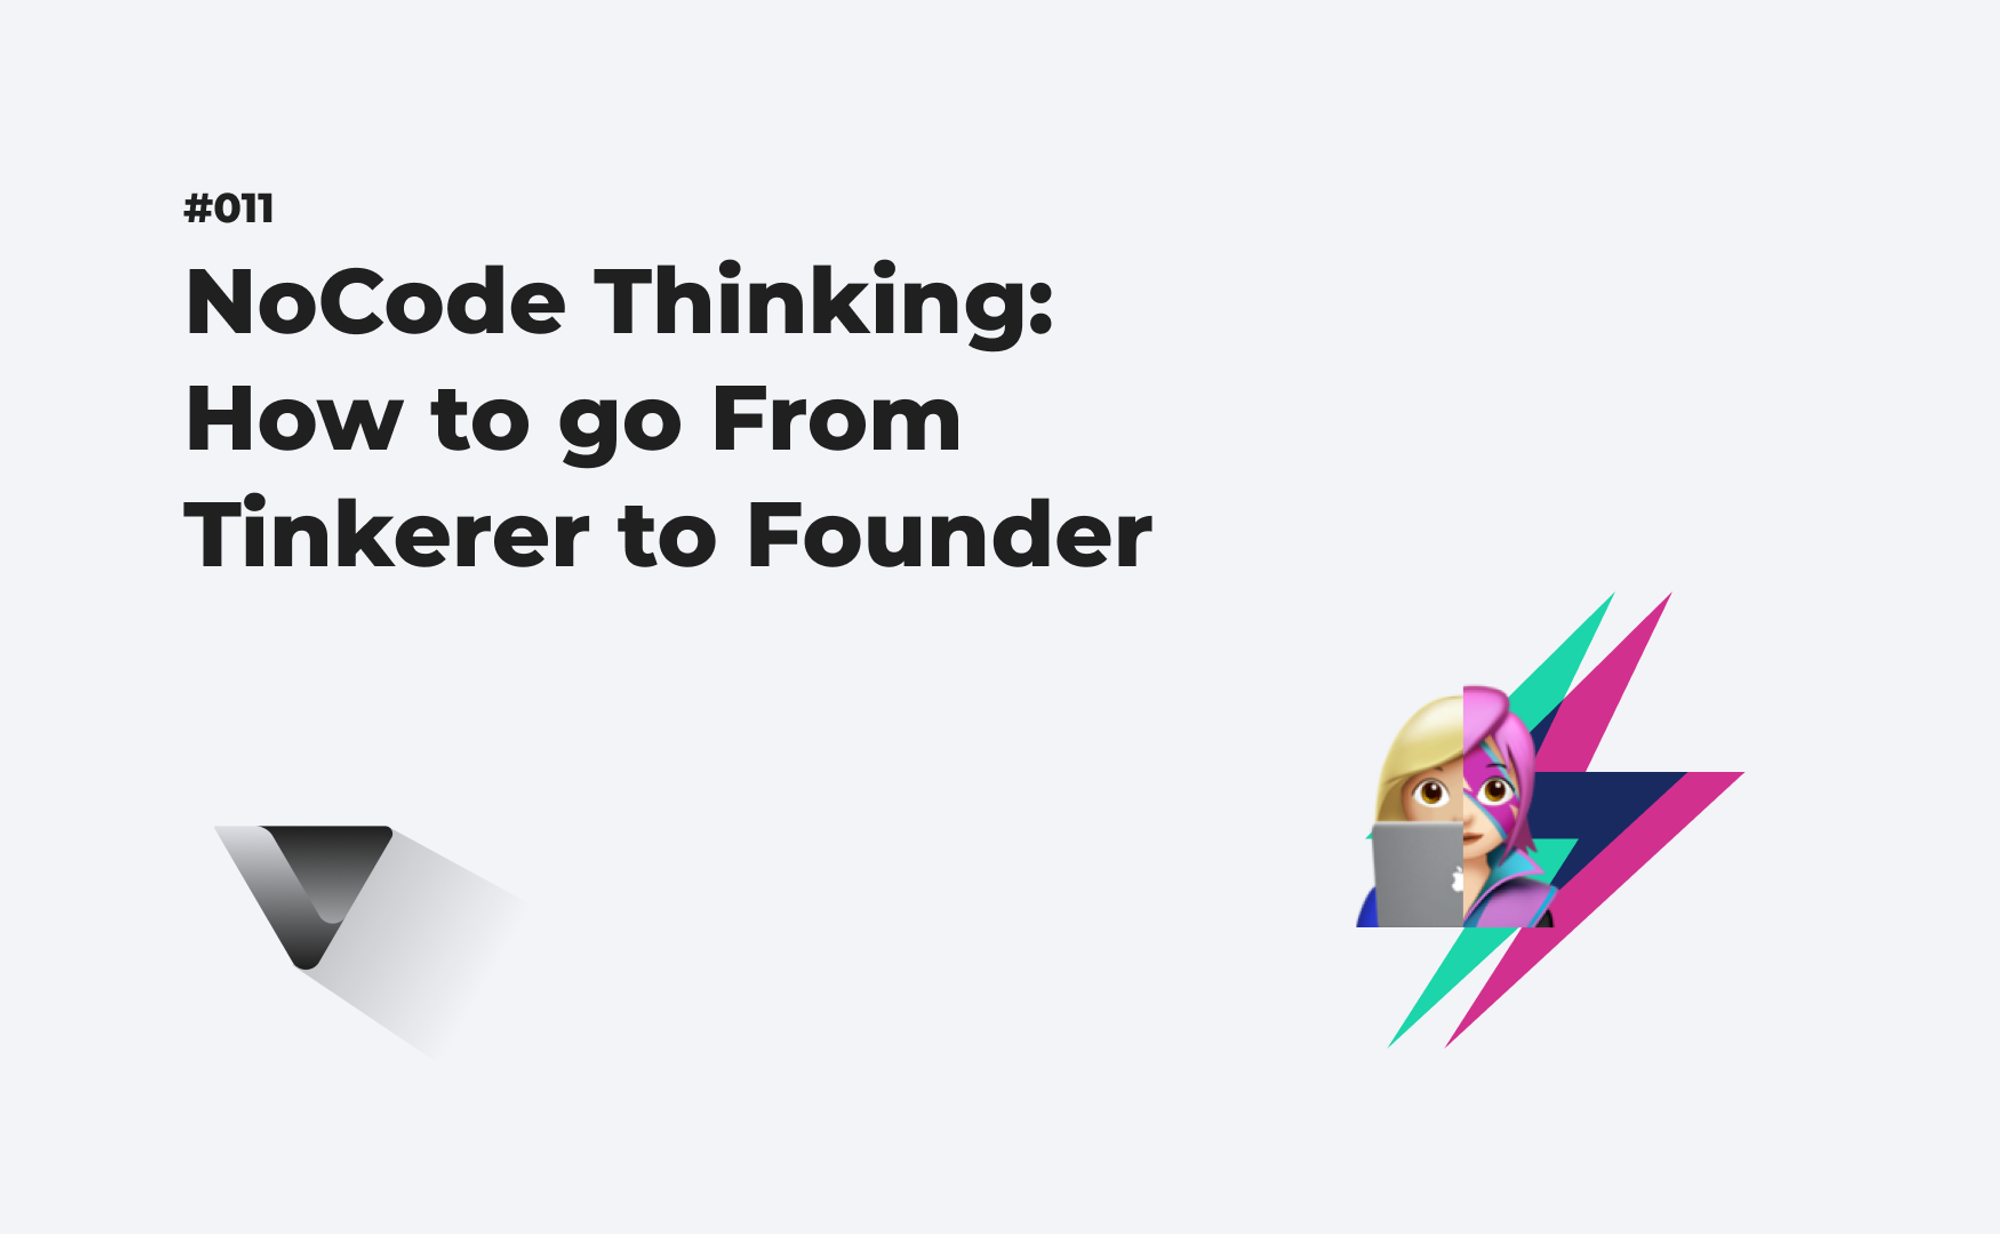 NoCode Thinking: How to go from Tinkerer to Founder